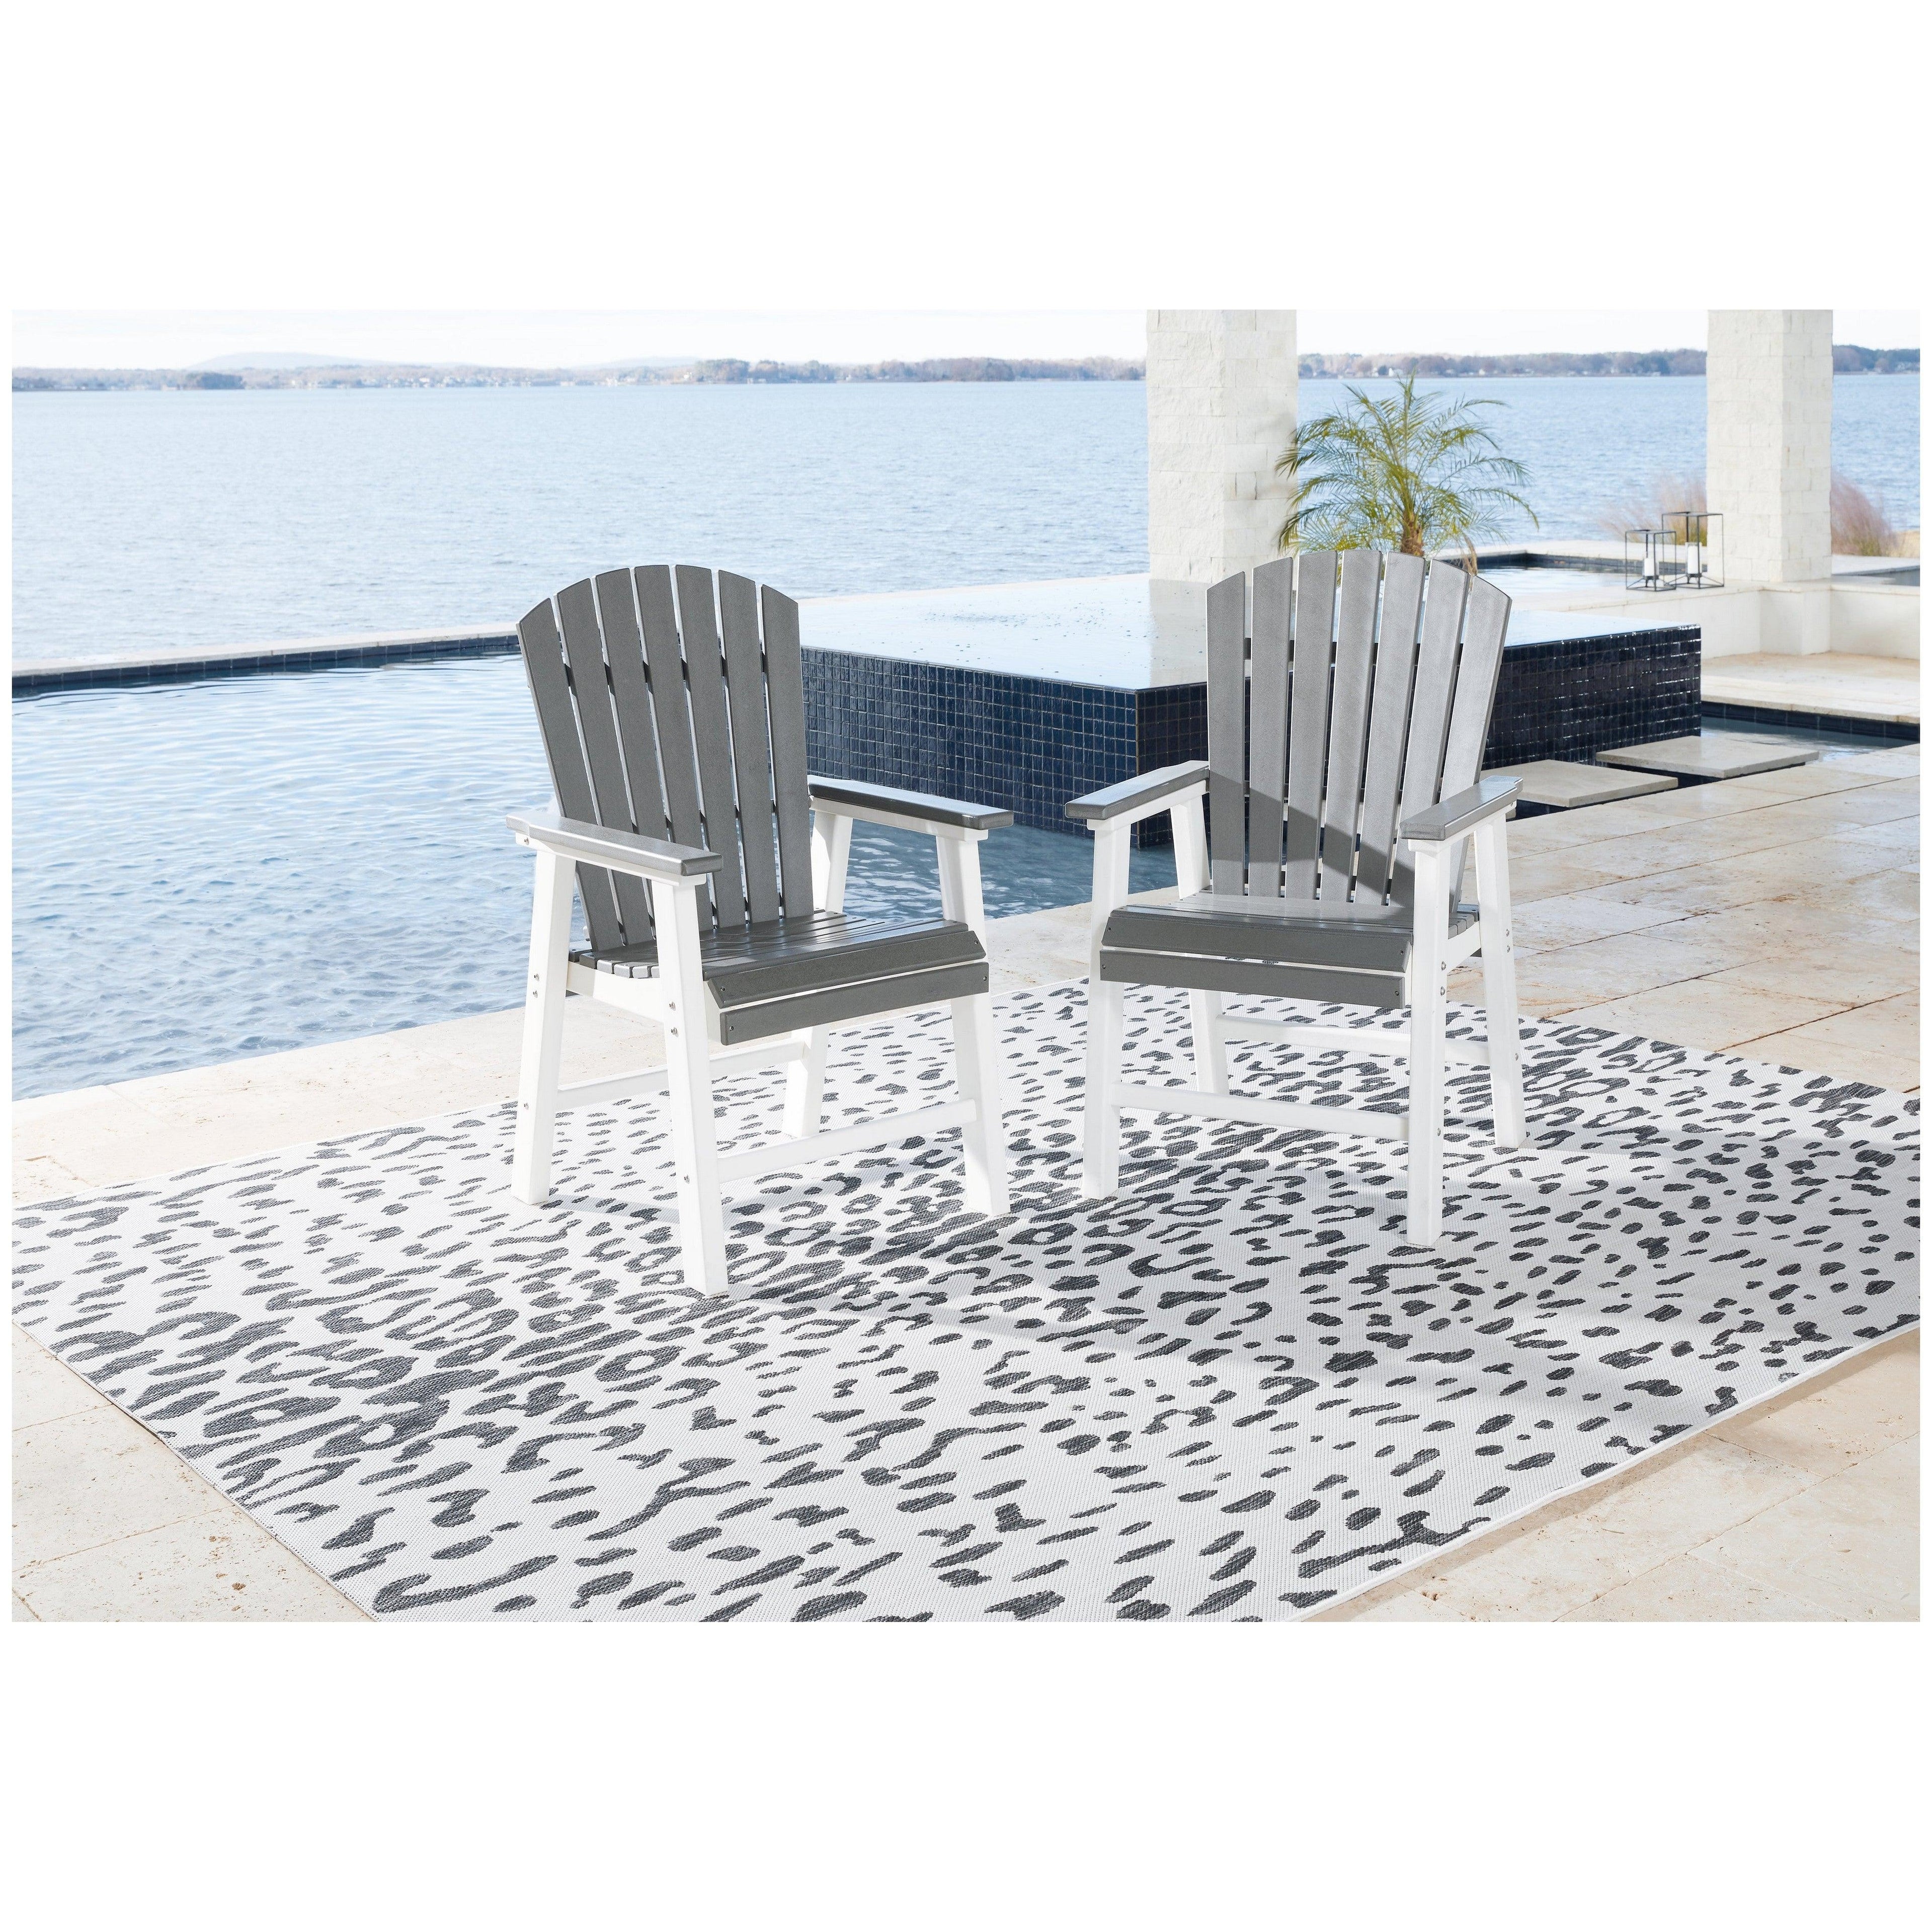 Transville Outdoor Dining Arm Chair (Set of 2) Ash-P210-601A